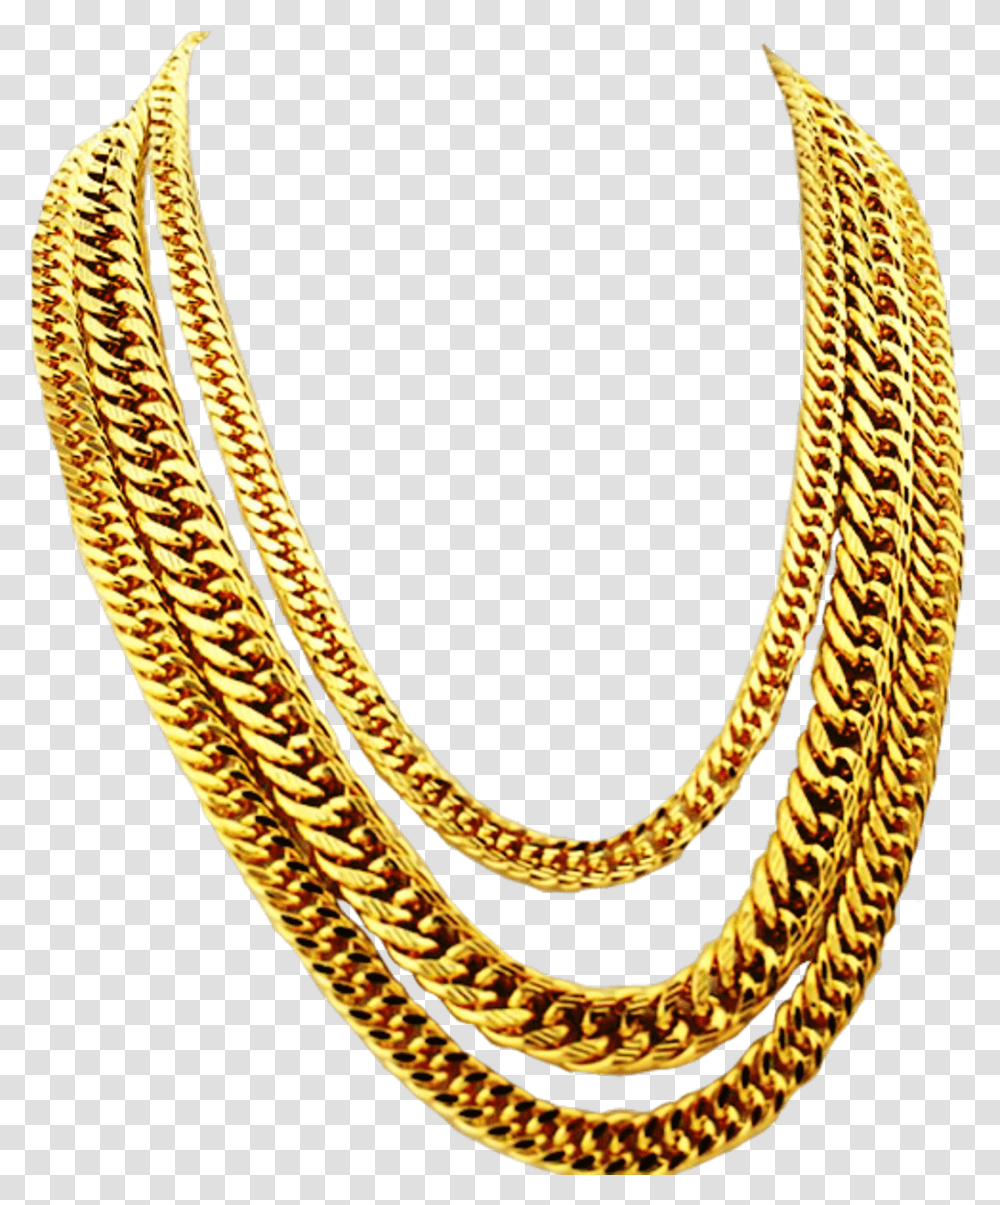 Download Gold Chain Hd Image Gold Chain Hd, Snake, Reptile, Animal, Necklace Transparent Png